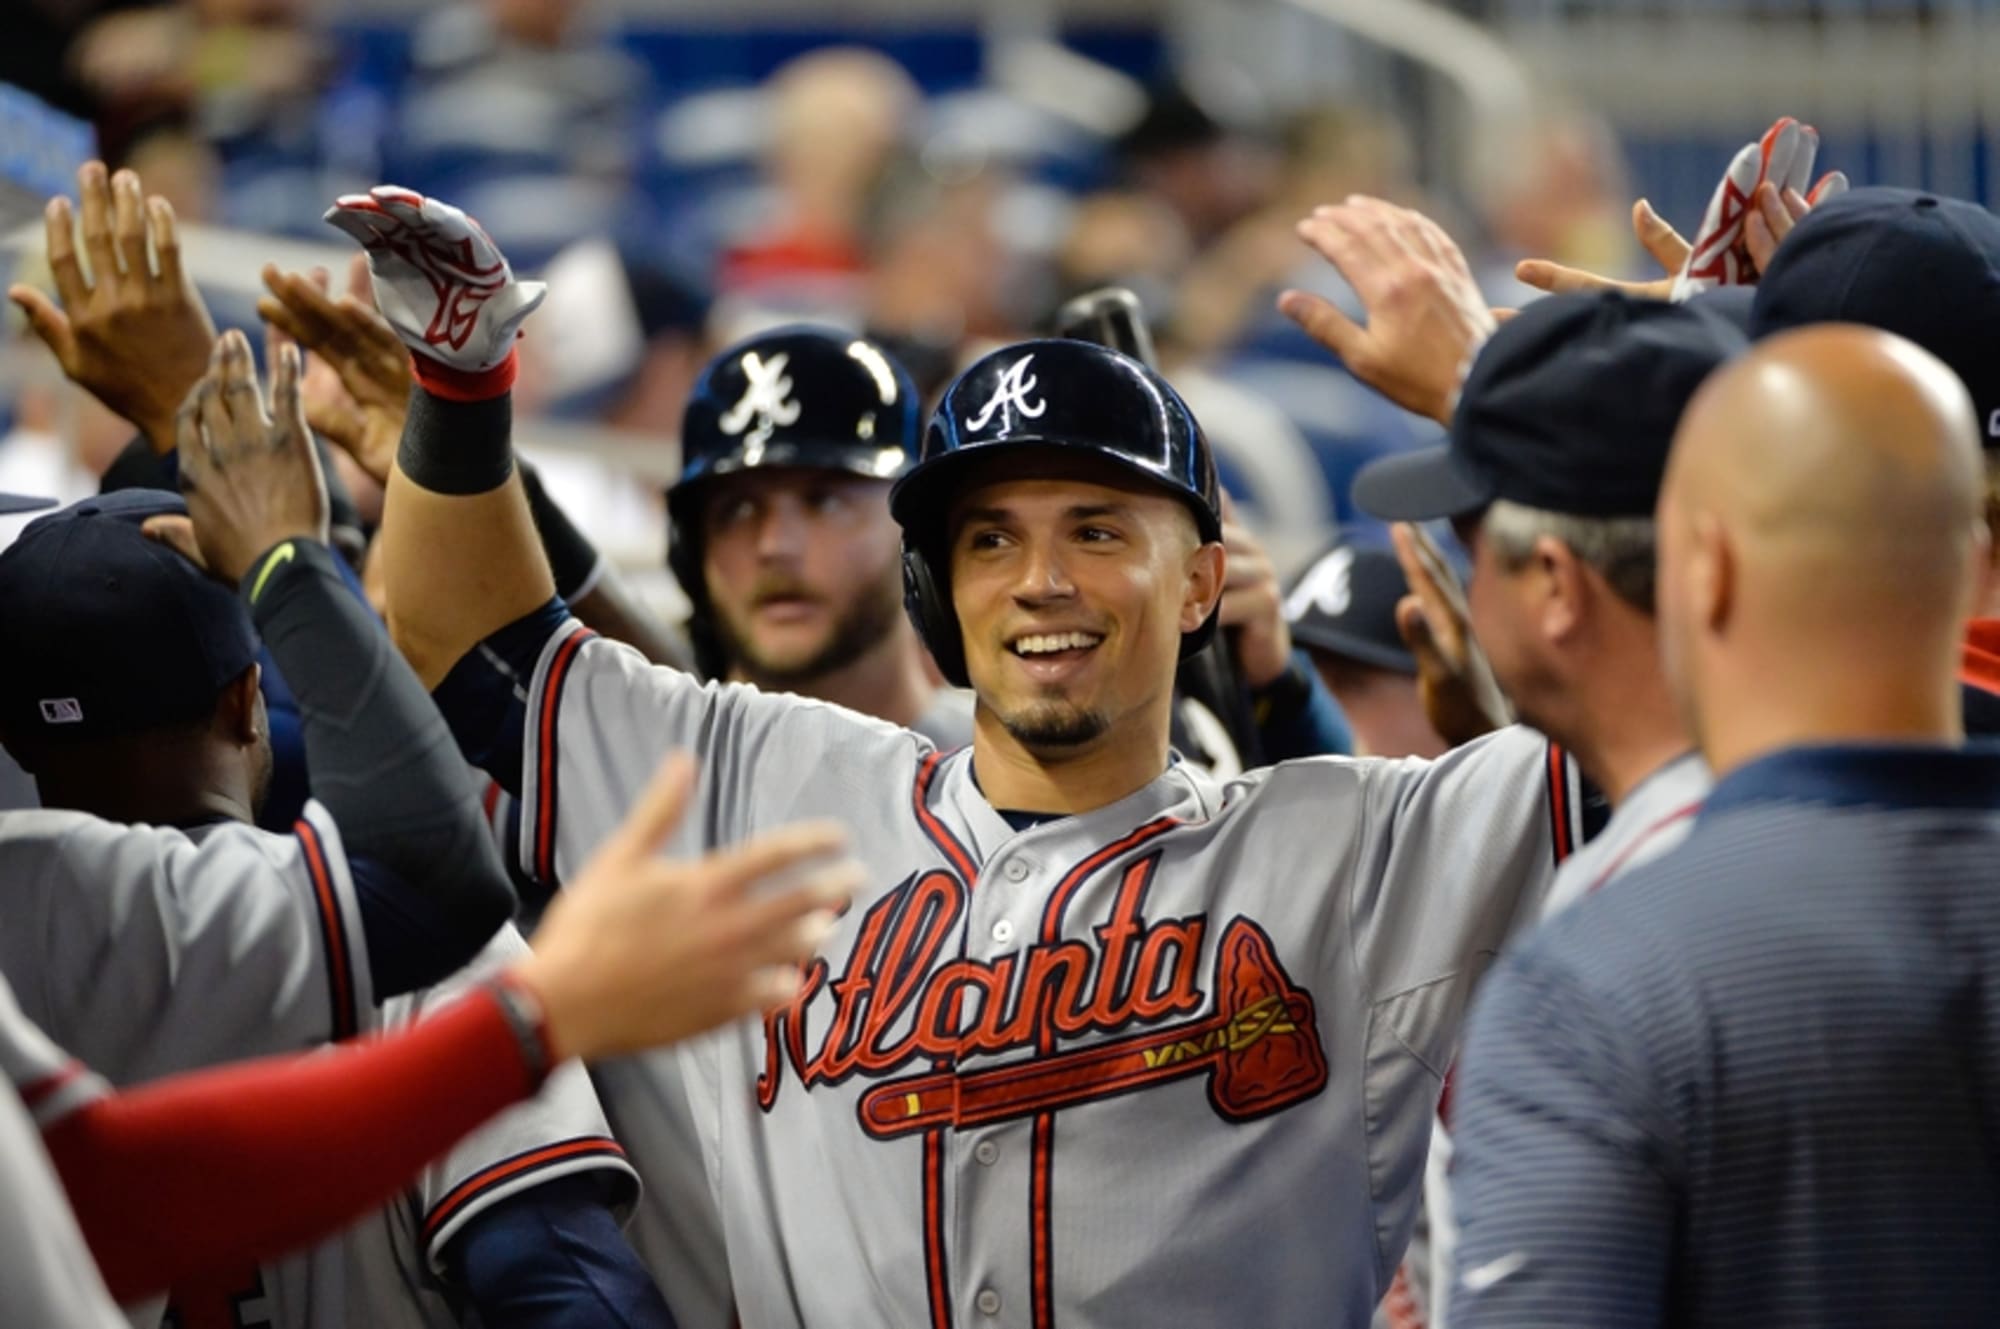 Braves' Jace Peterson's first career home run was grand slam